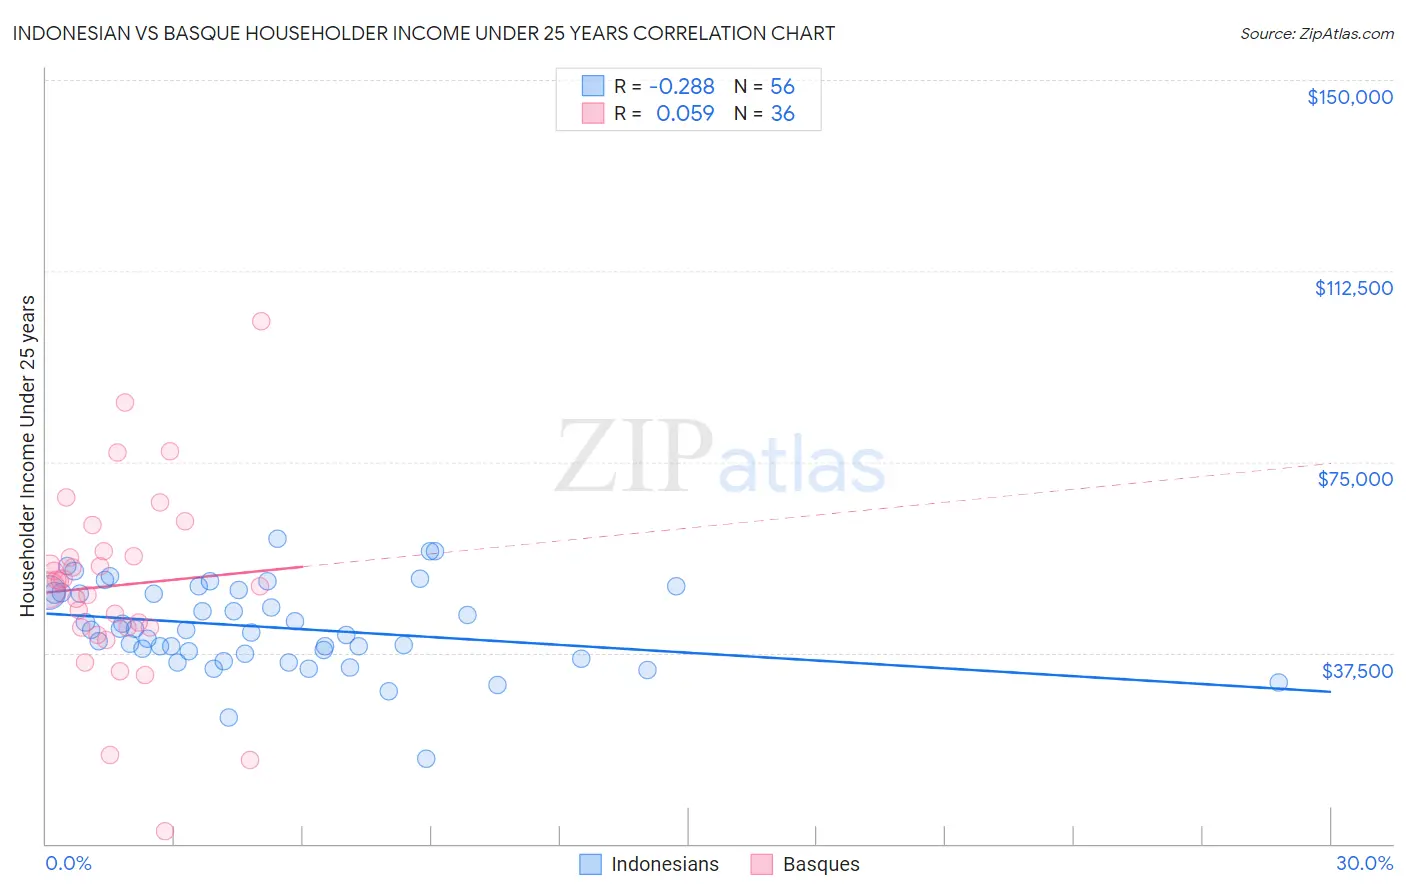 Indonesian vs Basque Householder Income Under 25 years